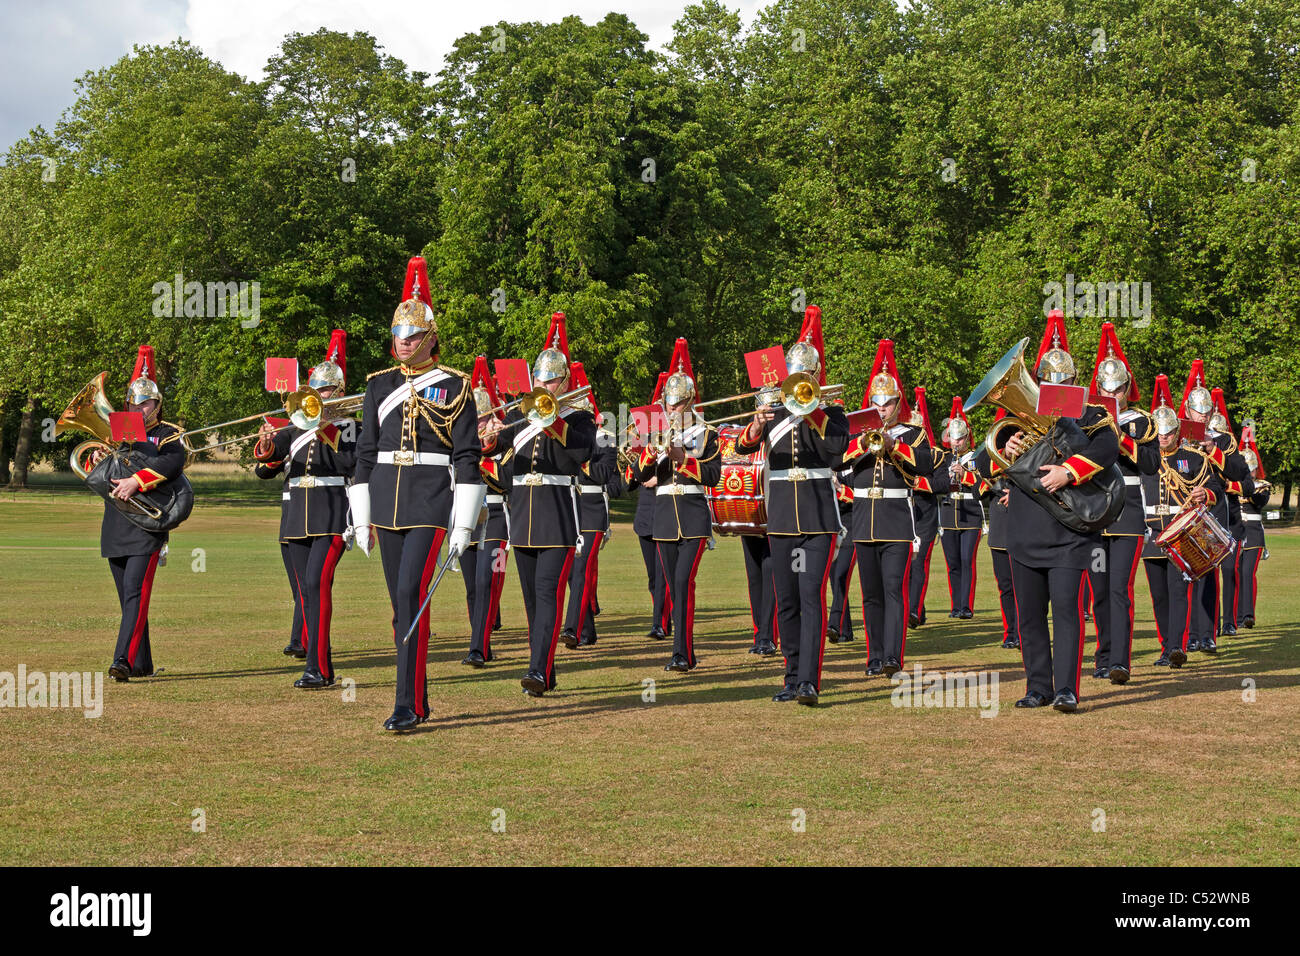 The military Band of the Blues and Royals playing and marching at a private royal function in Windsor Great Park. JMH4998 Stock Photo